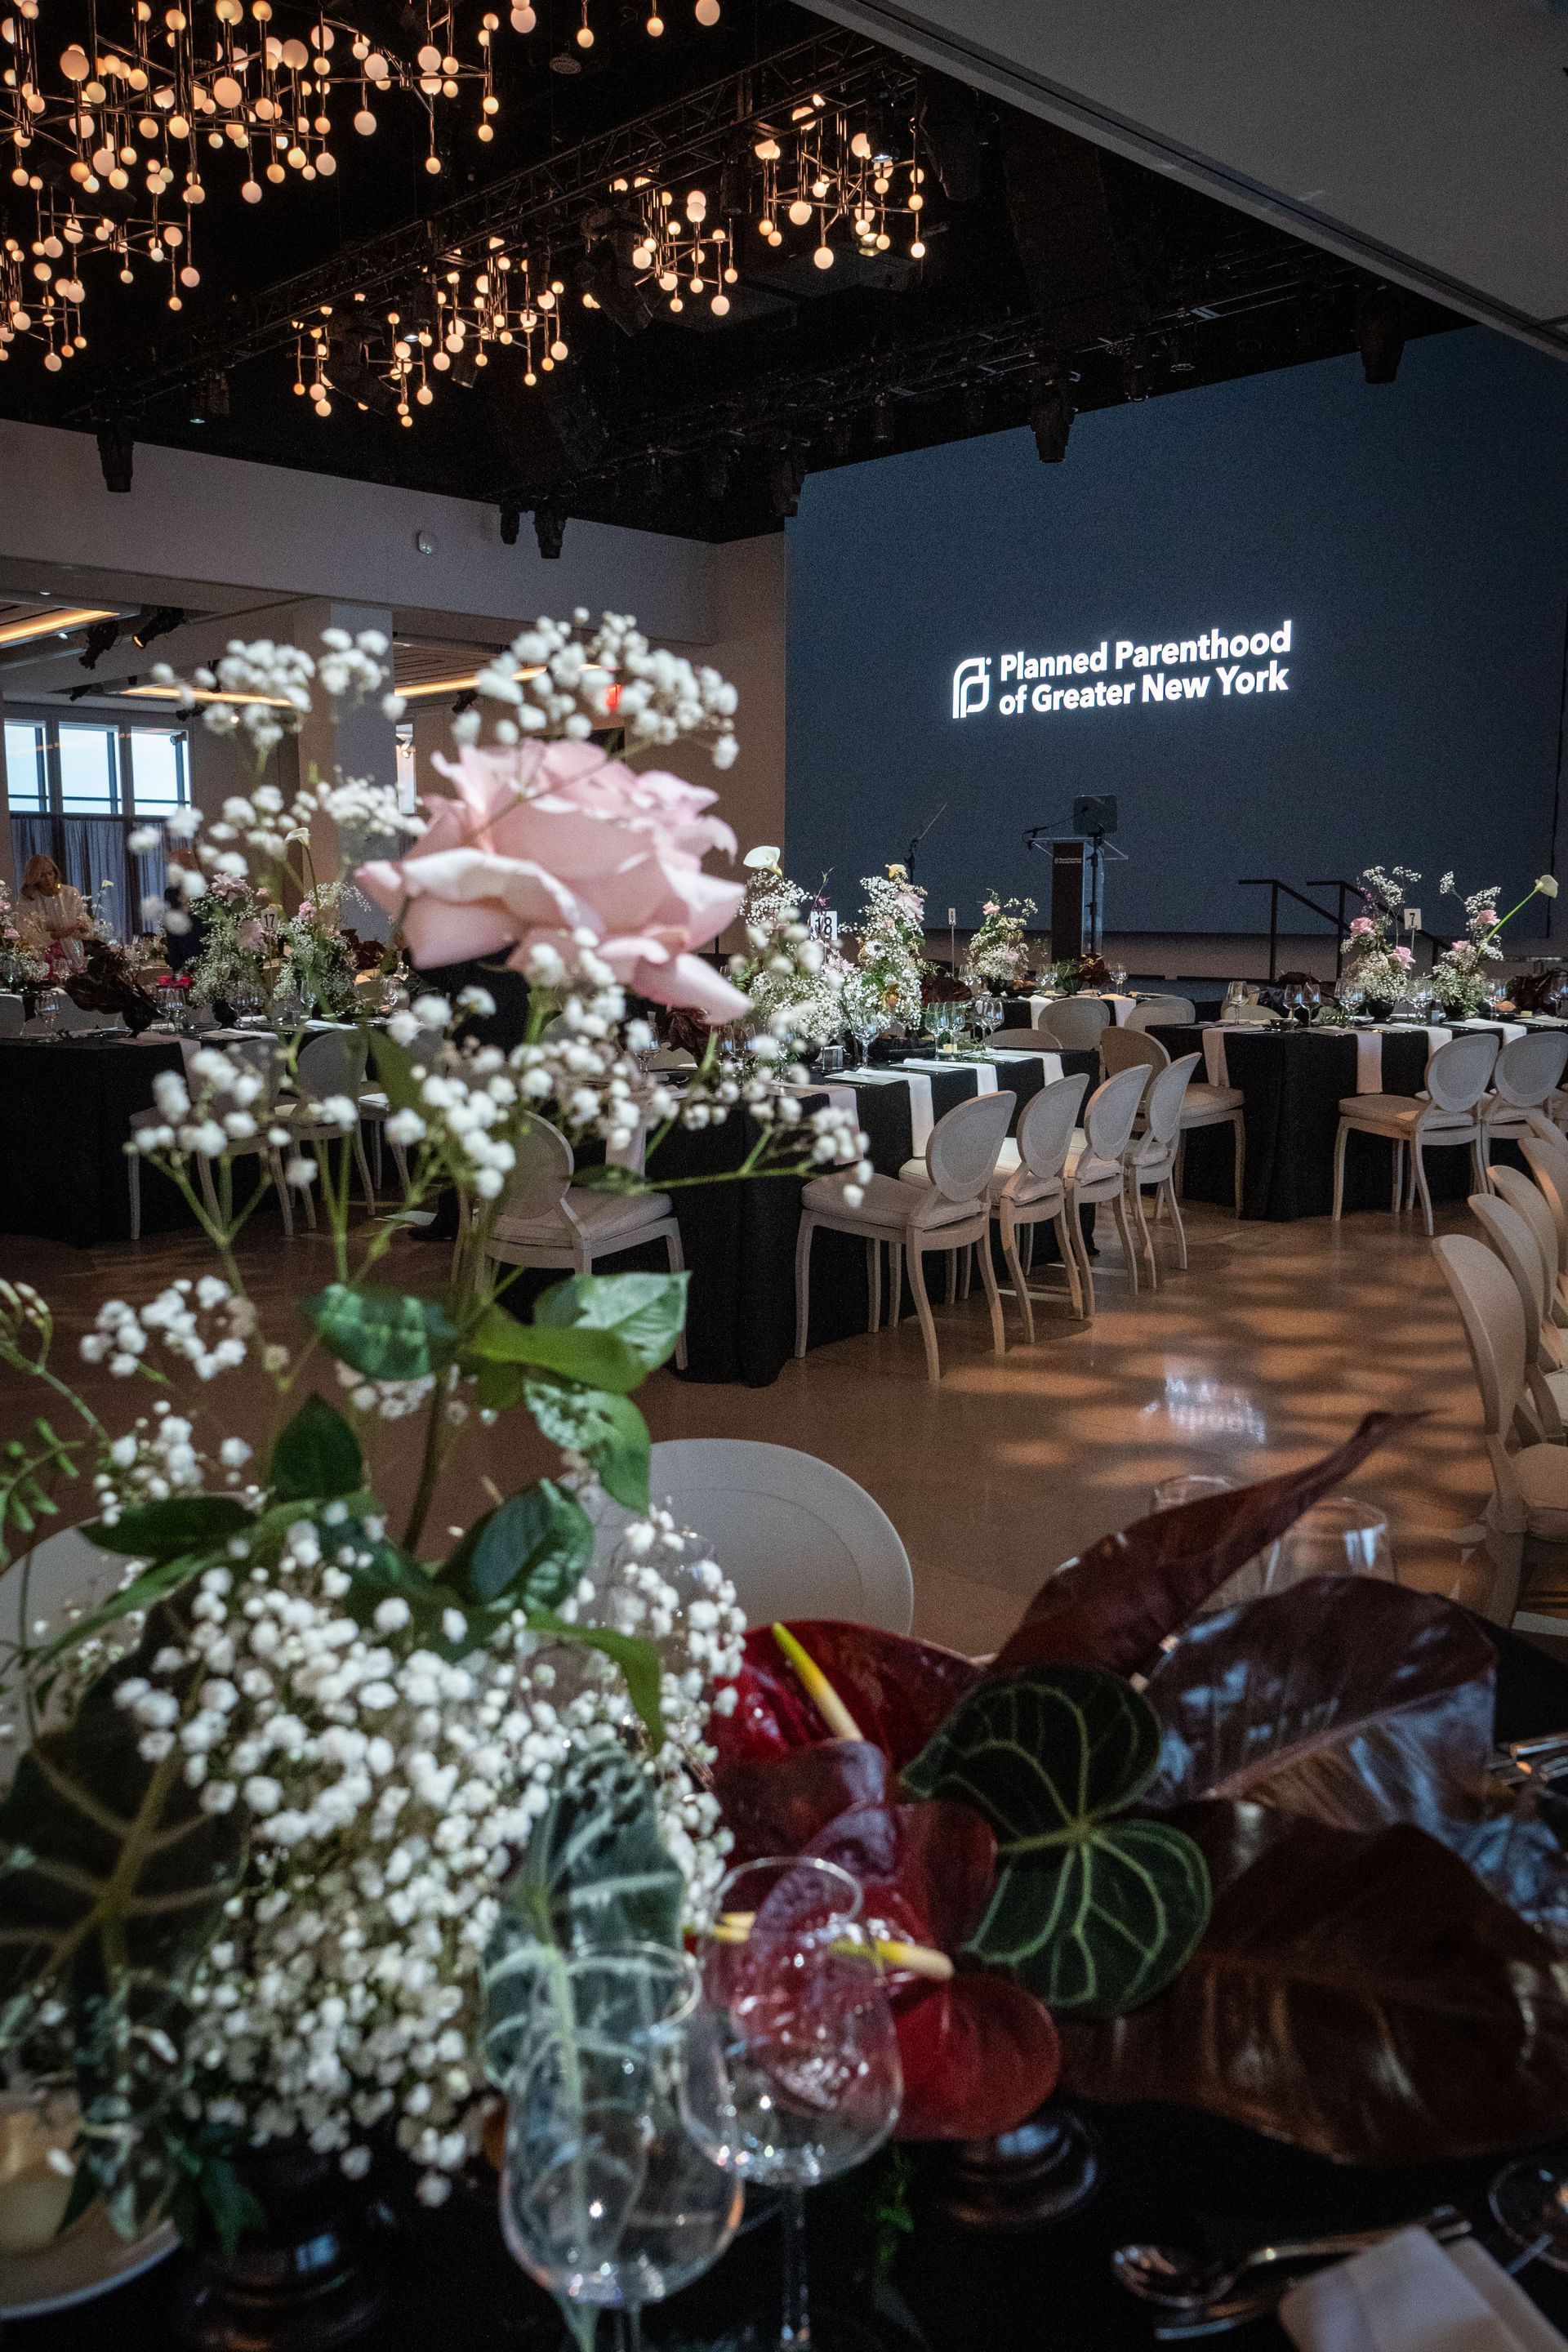 Planned Parenthood Event at The Glasshouse - photo of a room filled with tables and chairs and flowers .